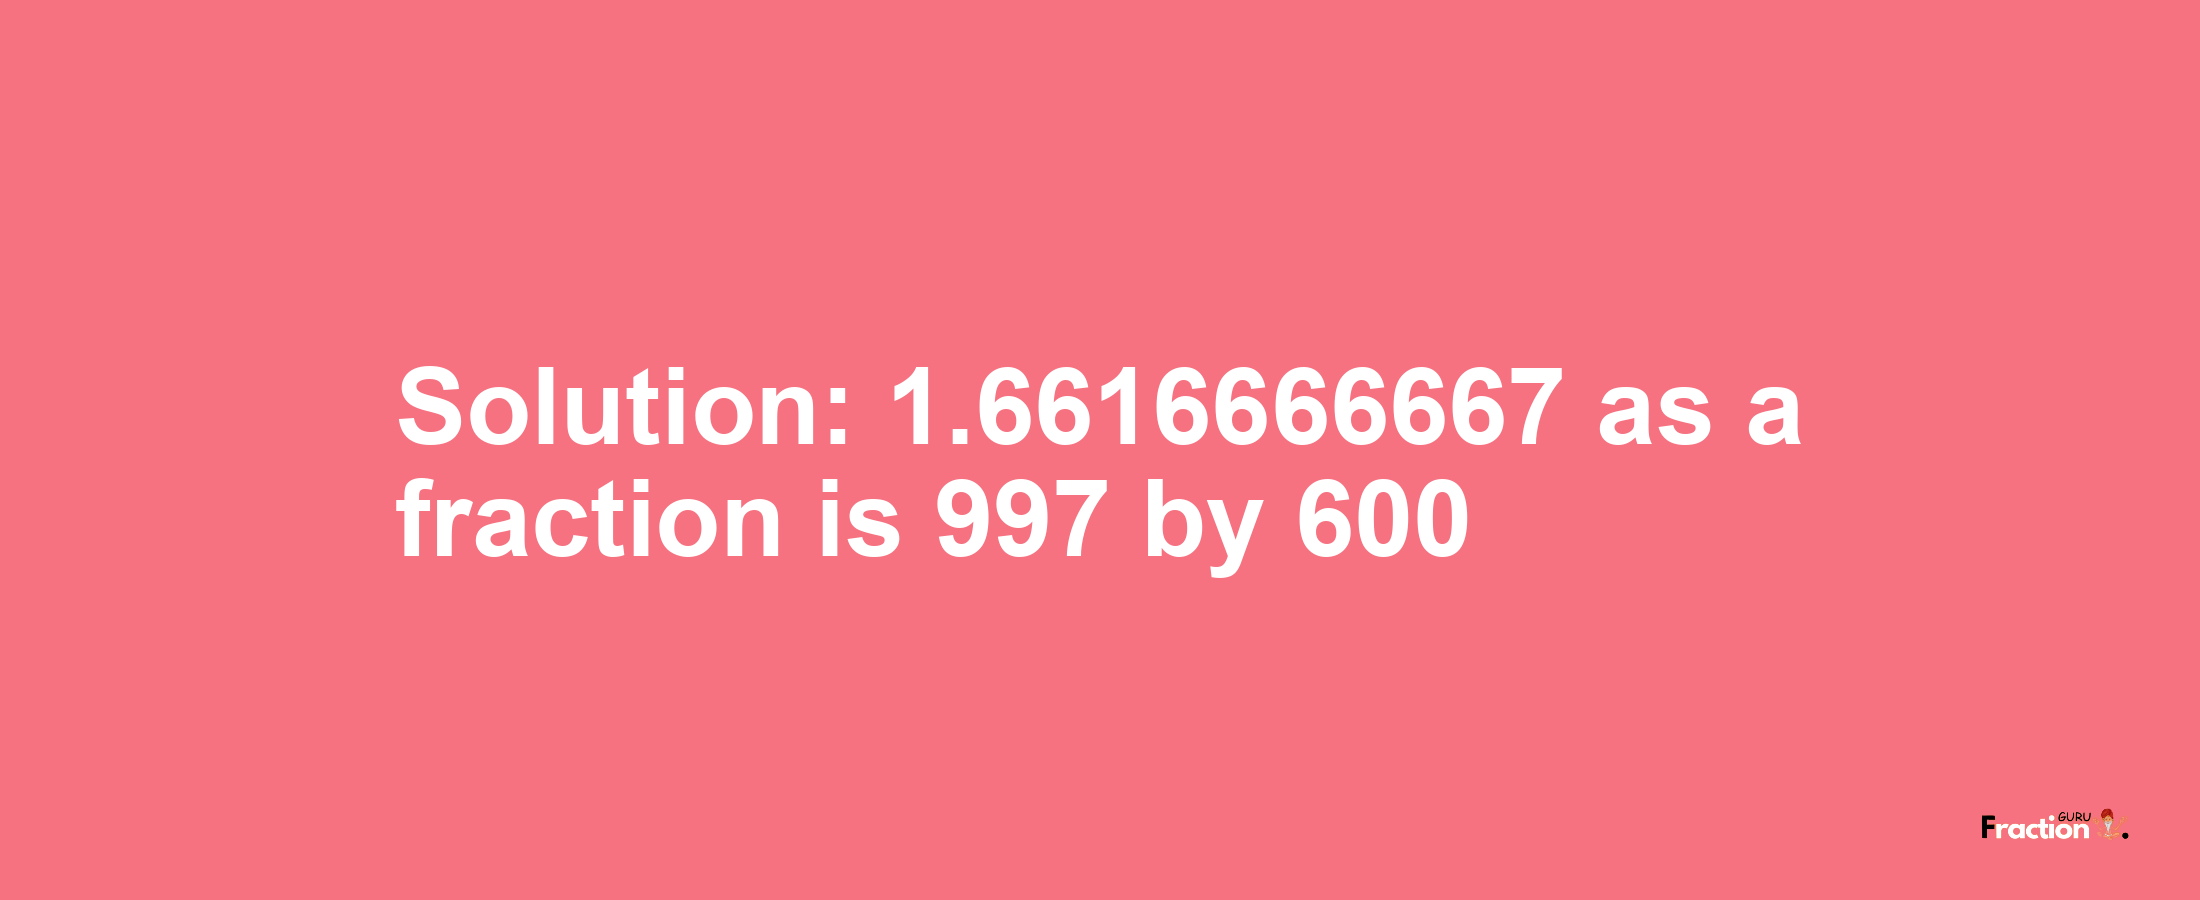 Solution:1.6616666667 as a fraction is 997/600